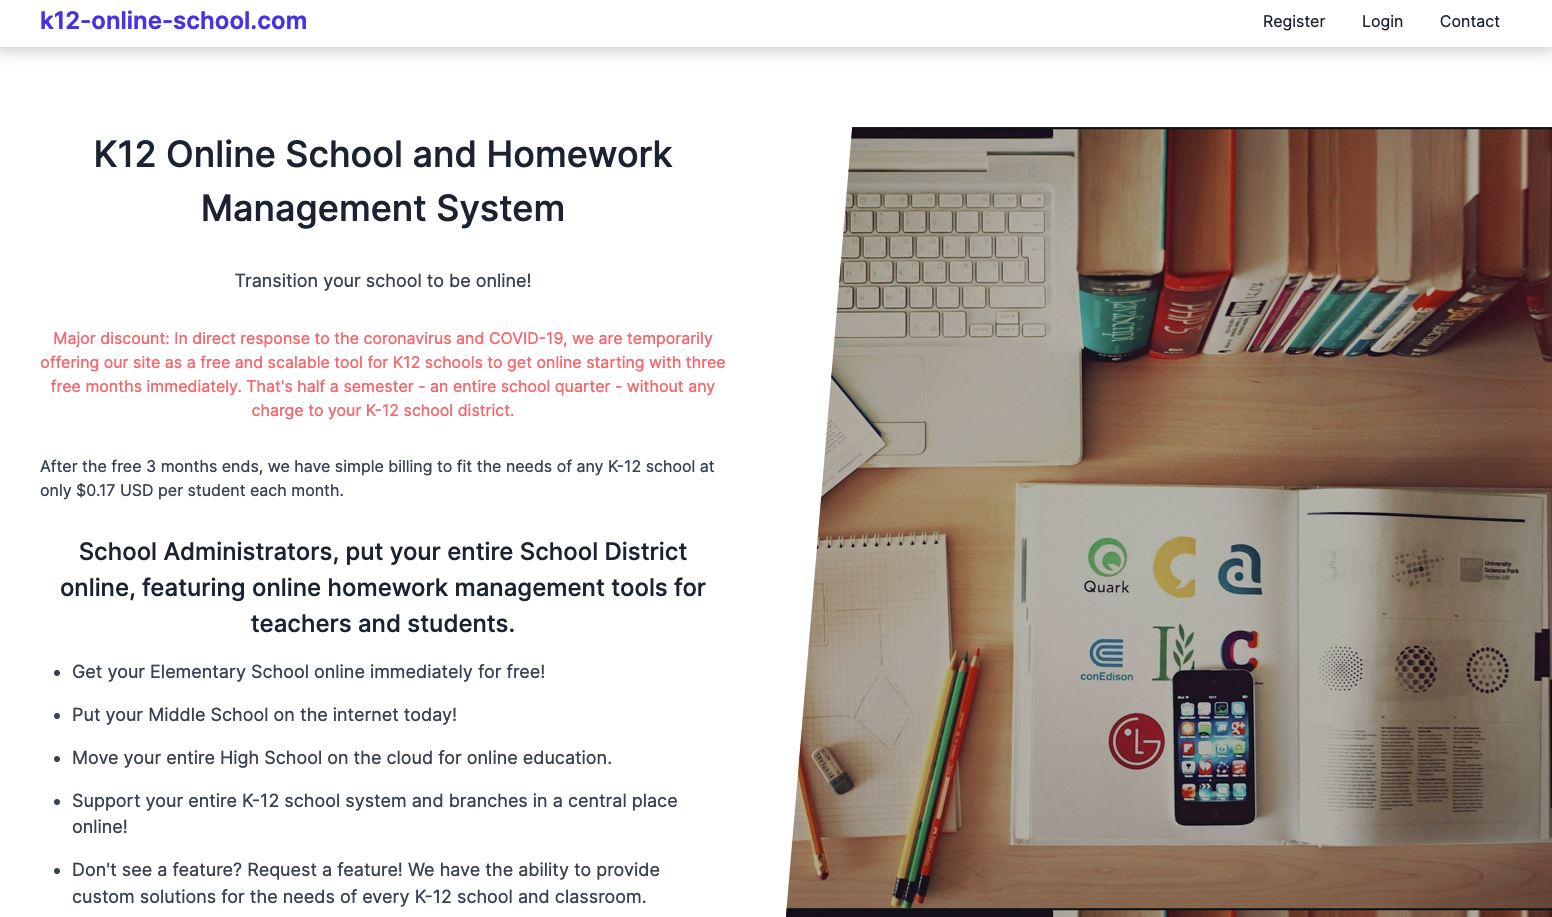 Teachers can manage students & assignments; students can upload their homework solutions.